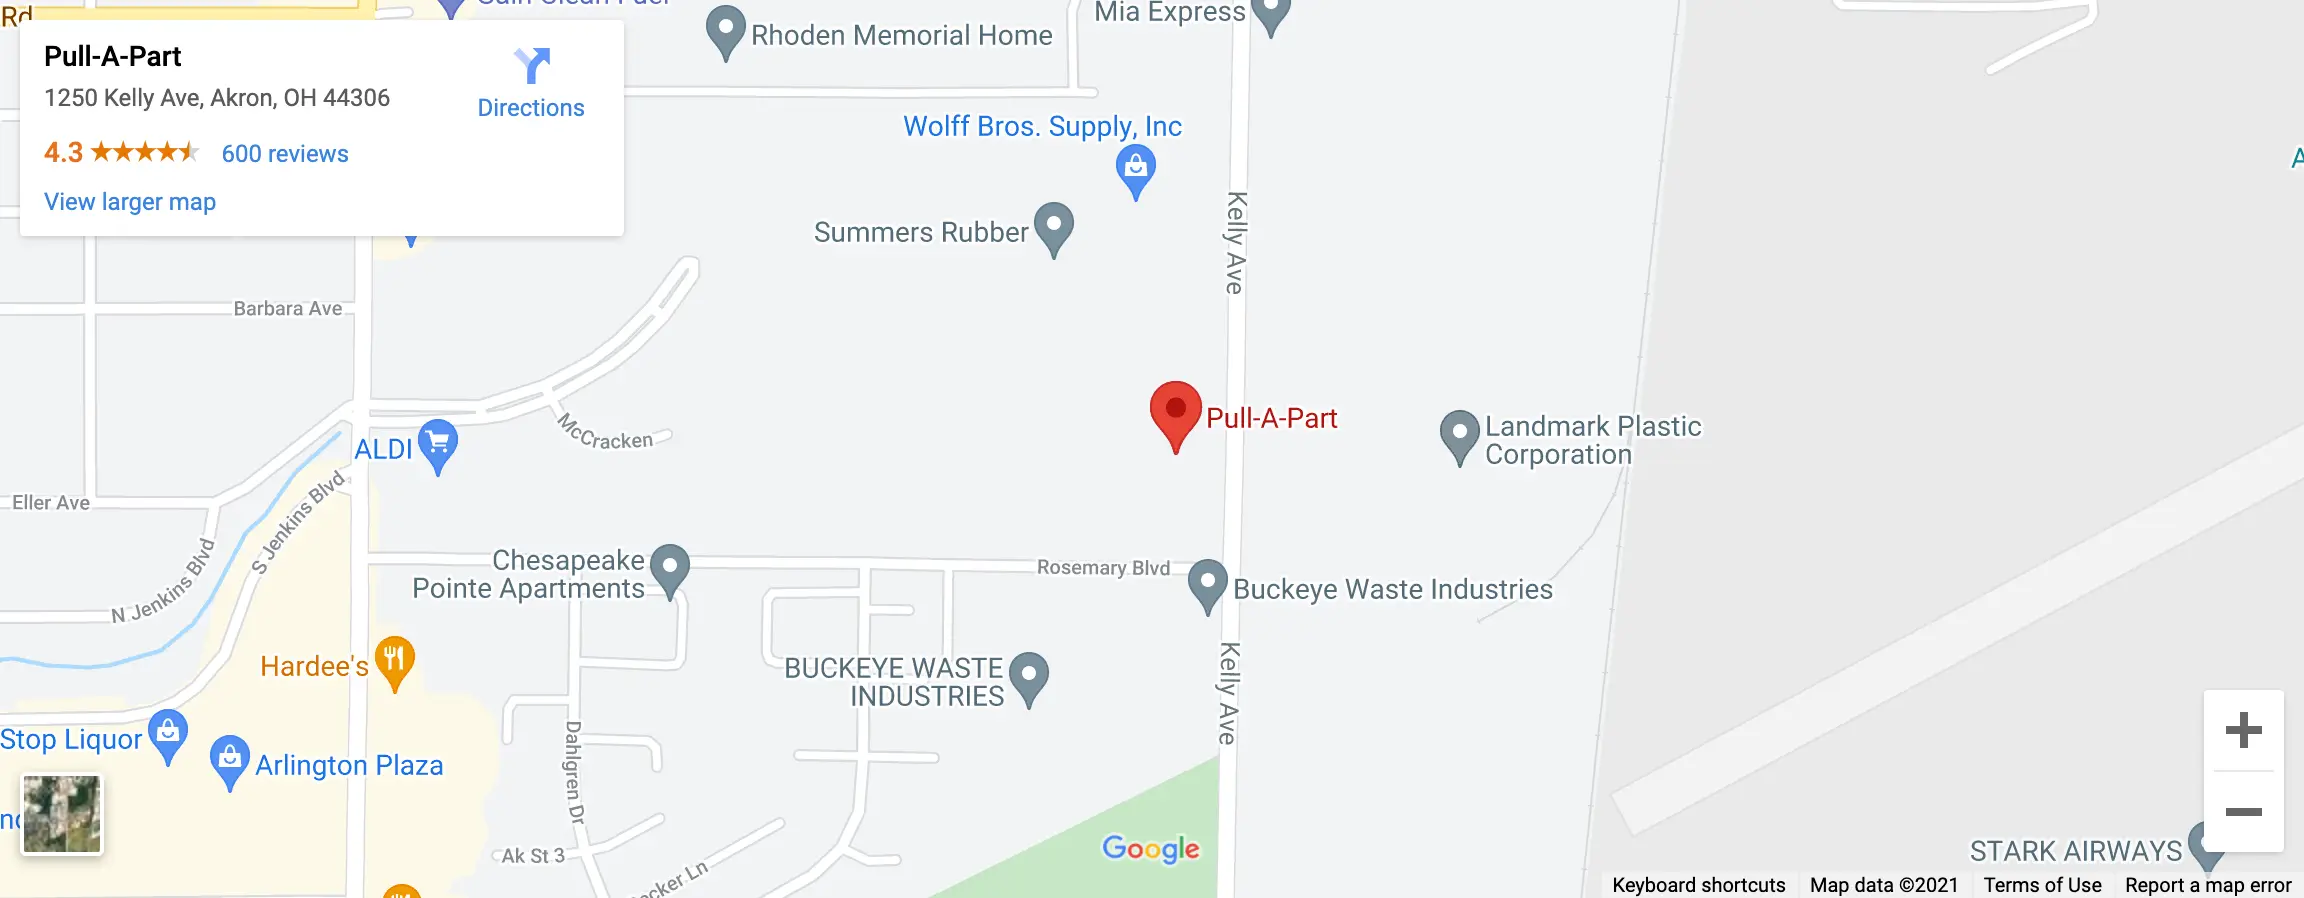 Get Directions to Pull-A-Part Akron